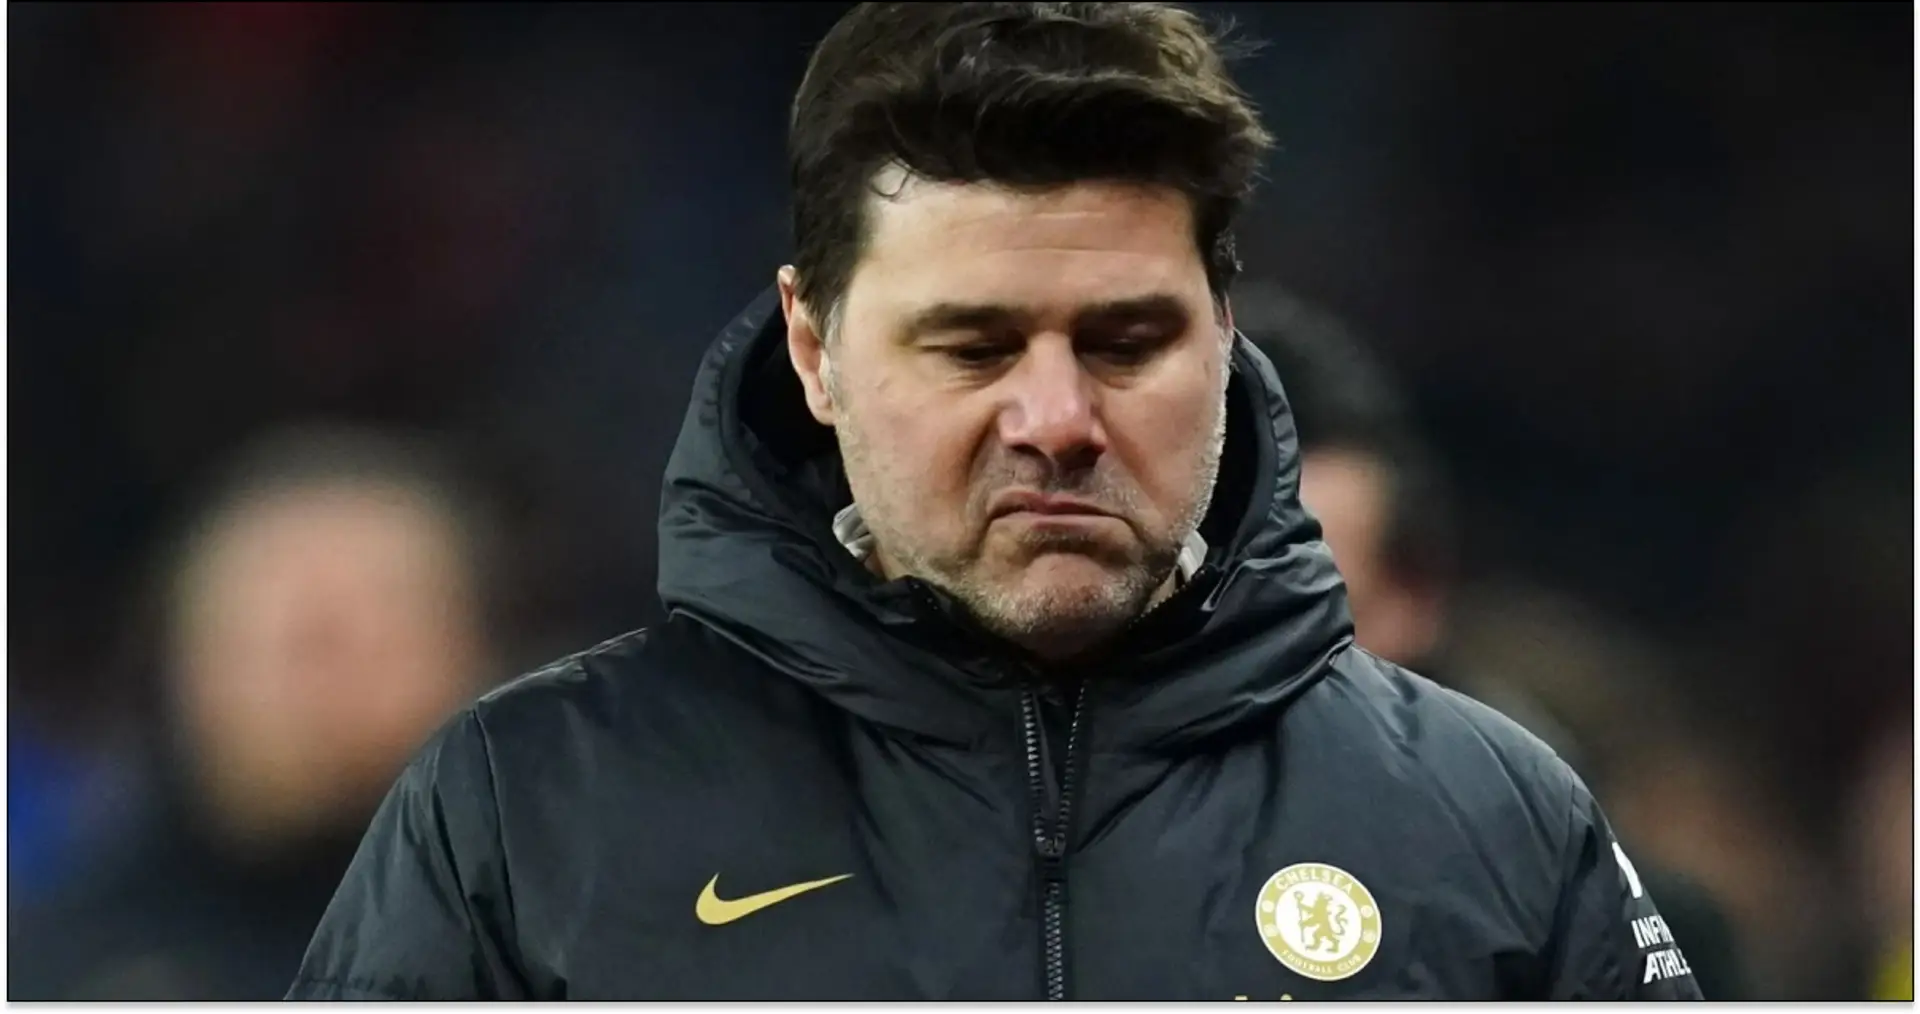 'I'm not going to blame players': Pochettino after Arsenal defeat